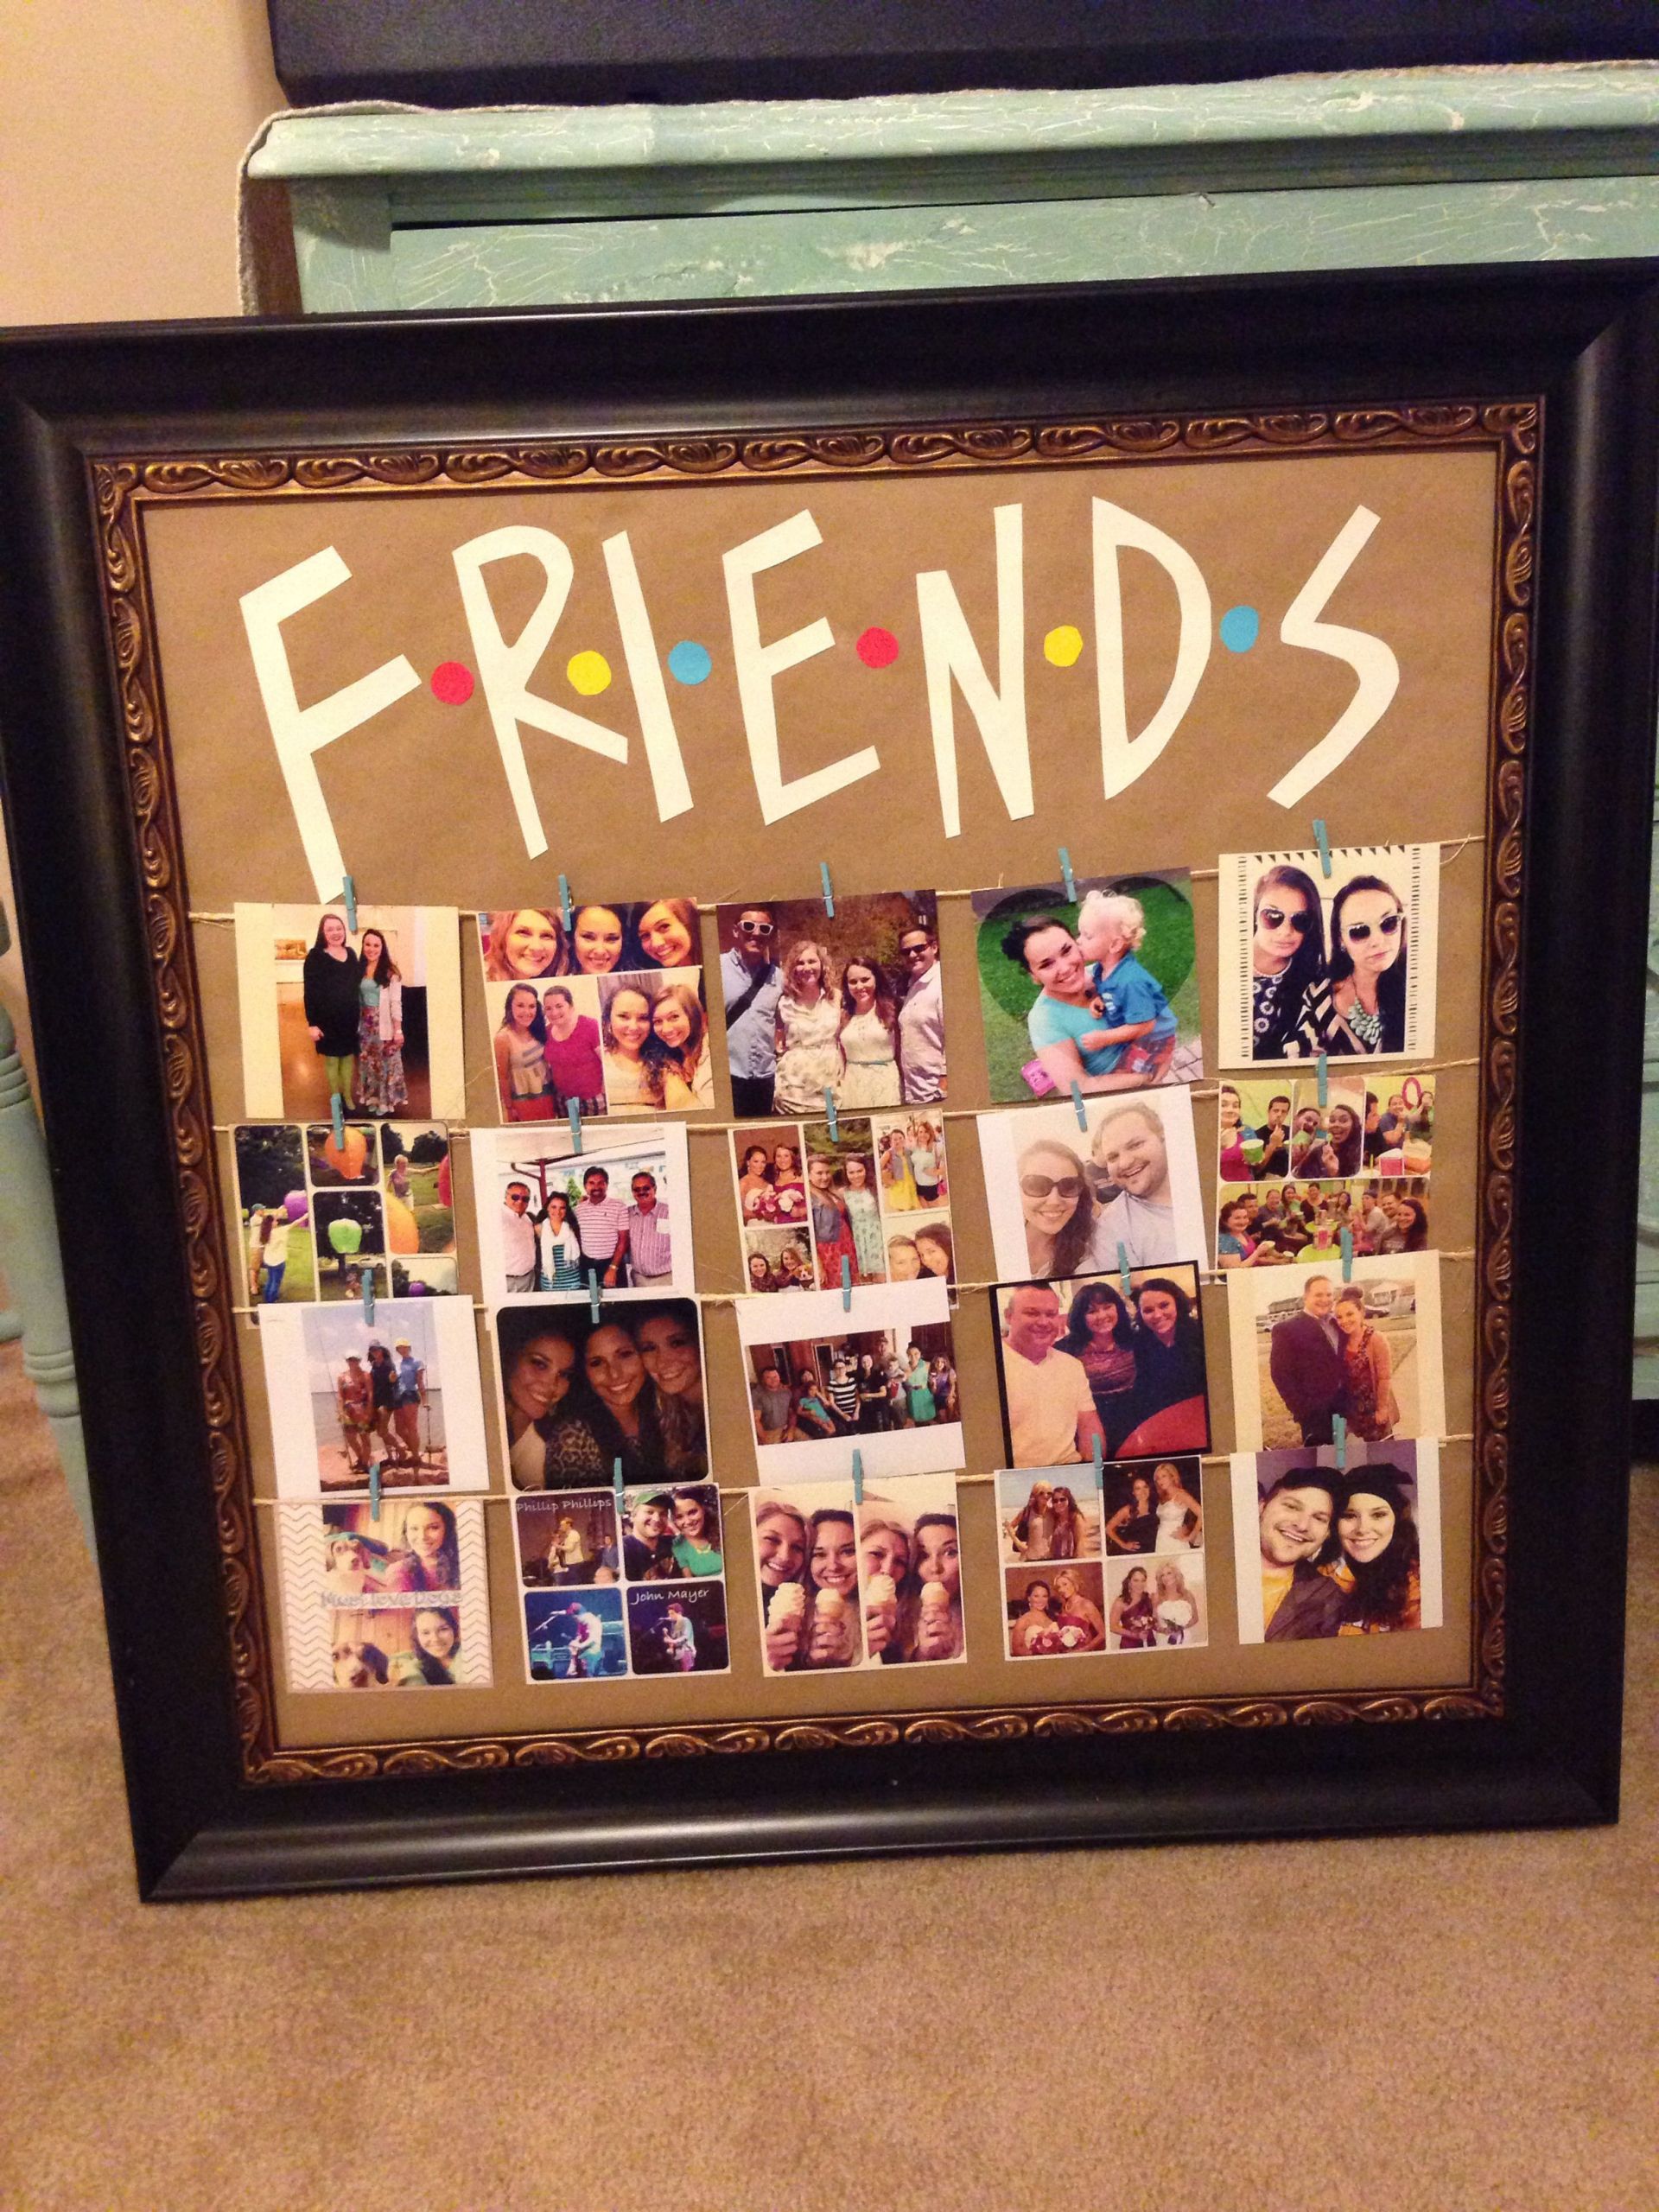 DIY Birthday Gifts For Best Friend Girl
 Friends tv show picture frame diy party ideas